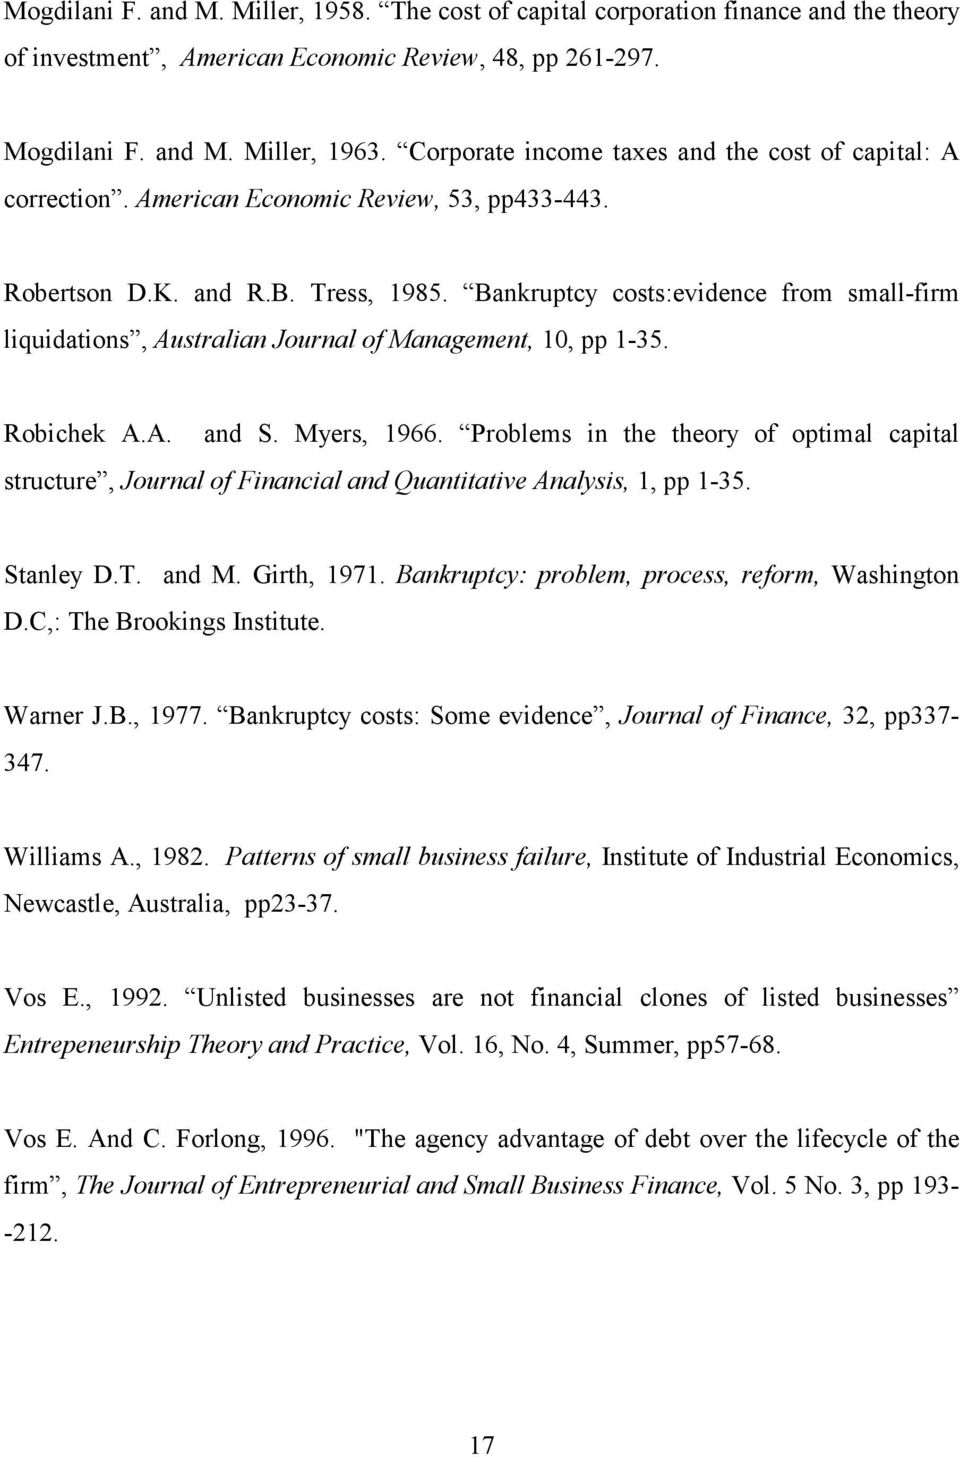 Bankruptcy costs:evidence from small-firm liquidations, Australian Journal of Management, 10, pp 1-35. Robichek A.A. and S. Myers, 1966.